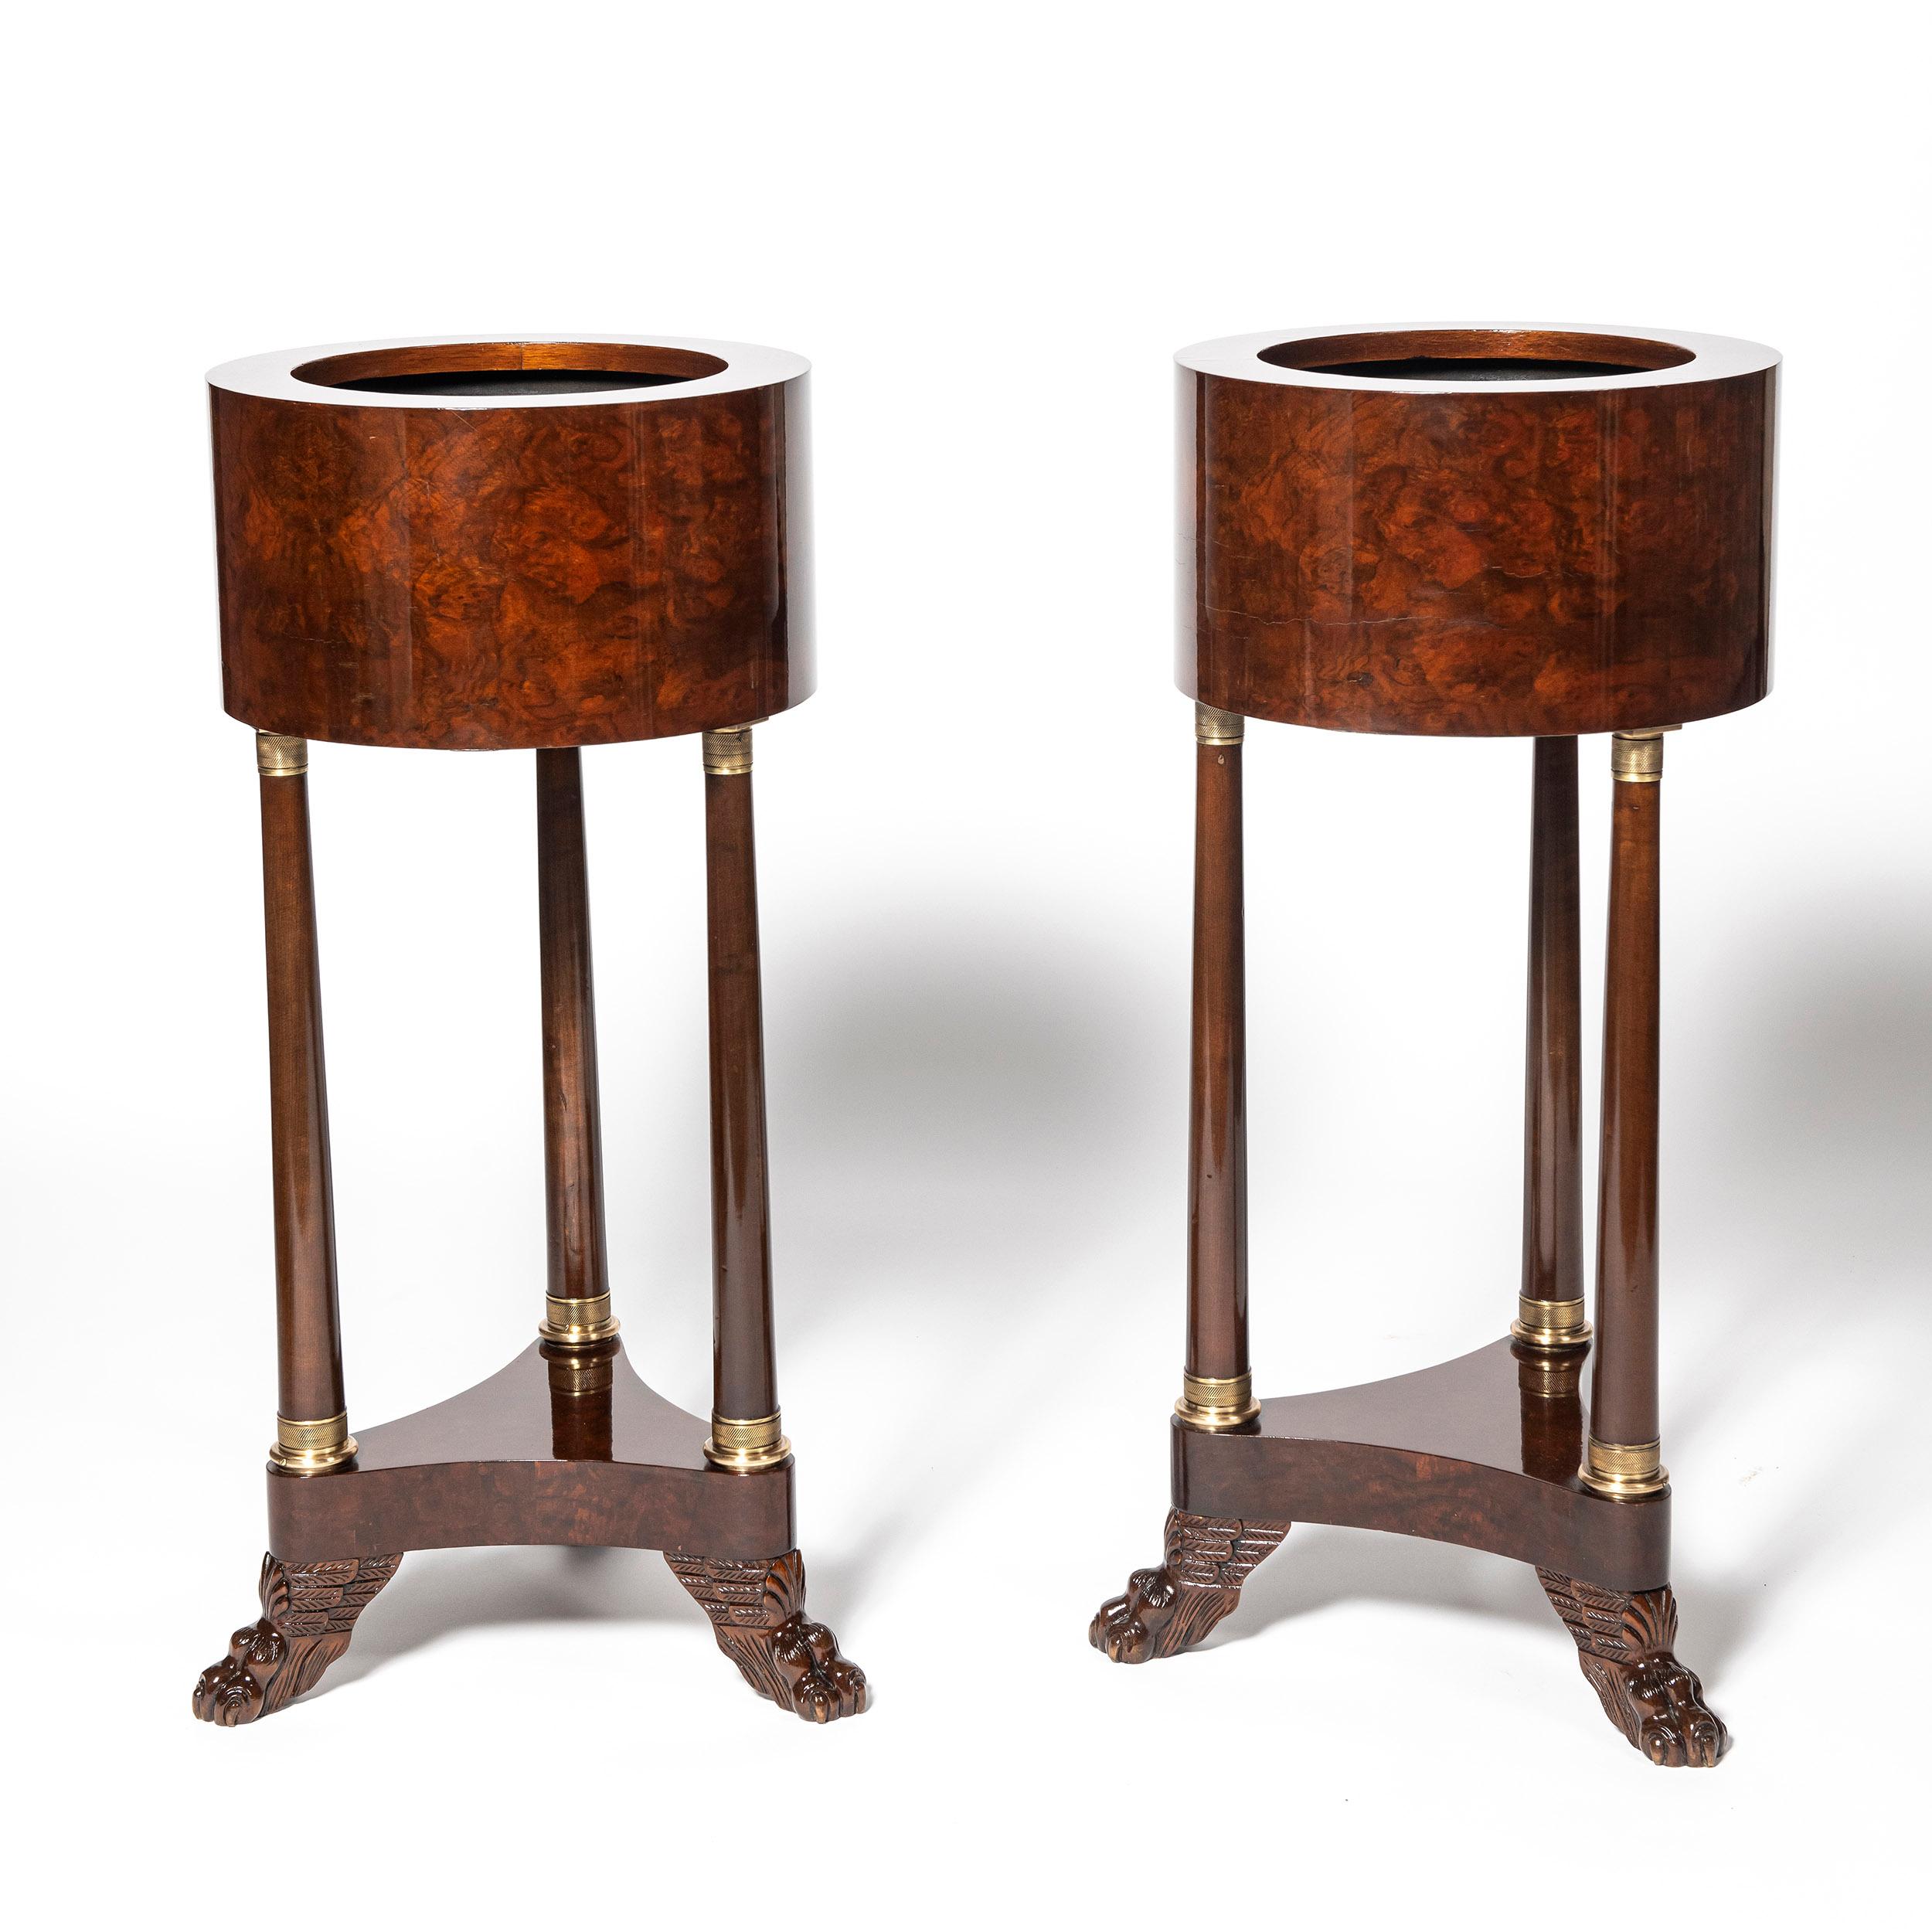 Pair of wood and bronze planters. France, late 19th century.